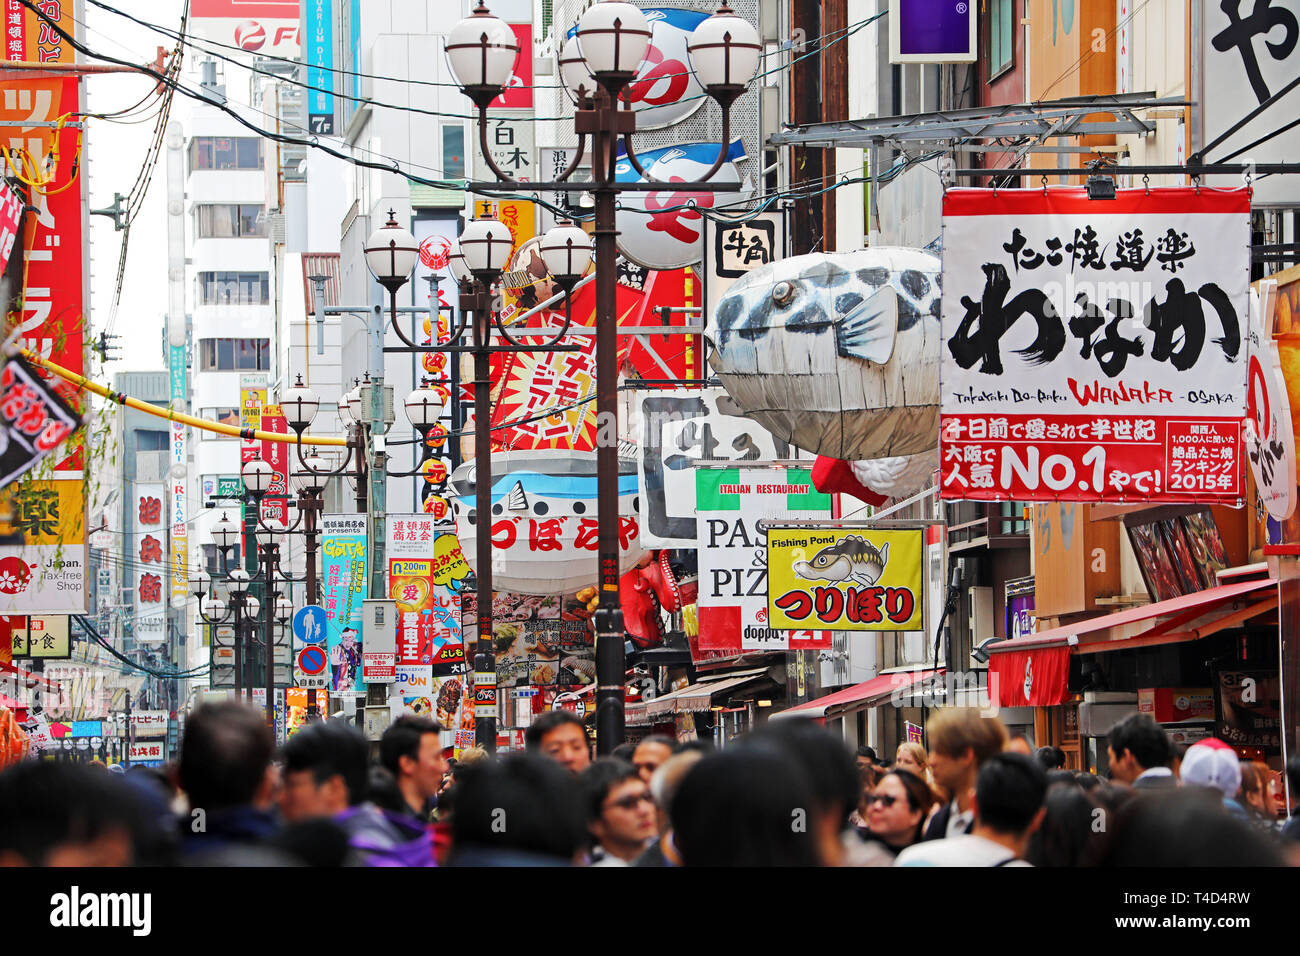 Advertising signs for shops and restaurants in Dotonbori, Osaka, Japan Stock Photo